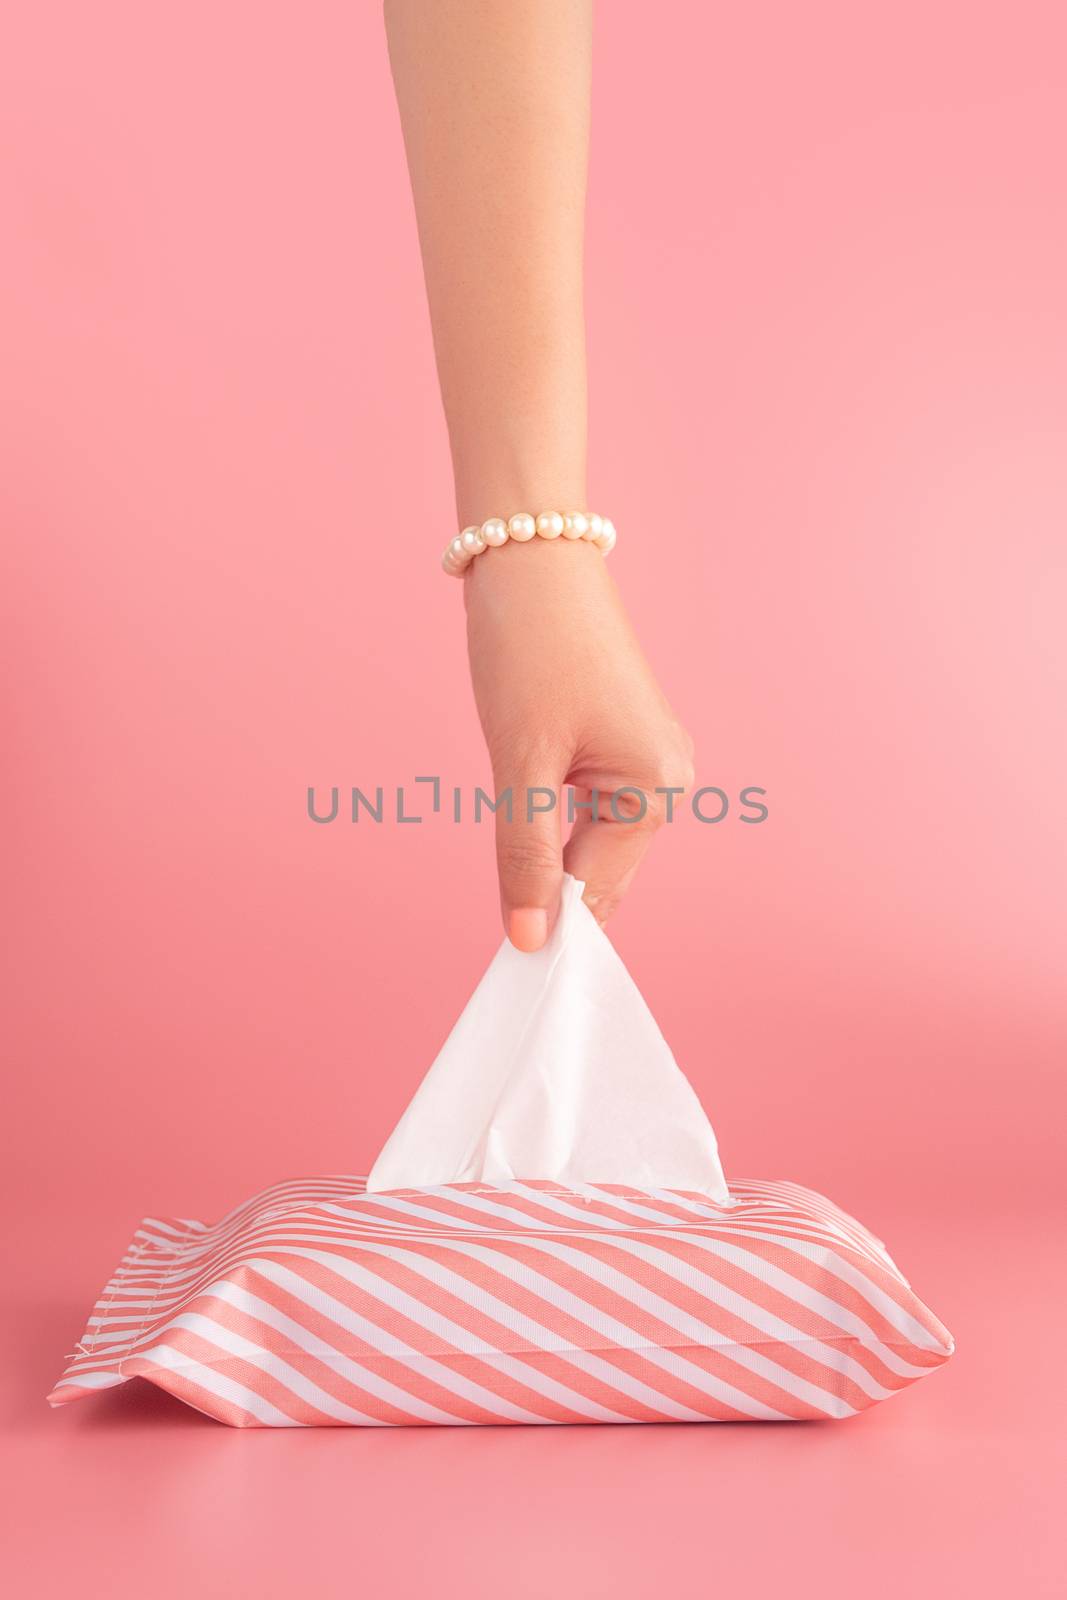 woman pull the tissue paper out of the tissue box isolated on pink background, vertical. sanitation and hygiene facility concept by asiandelight